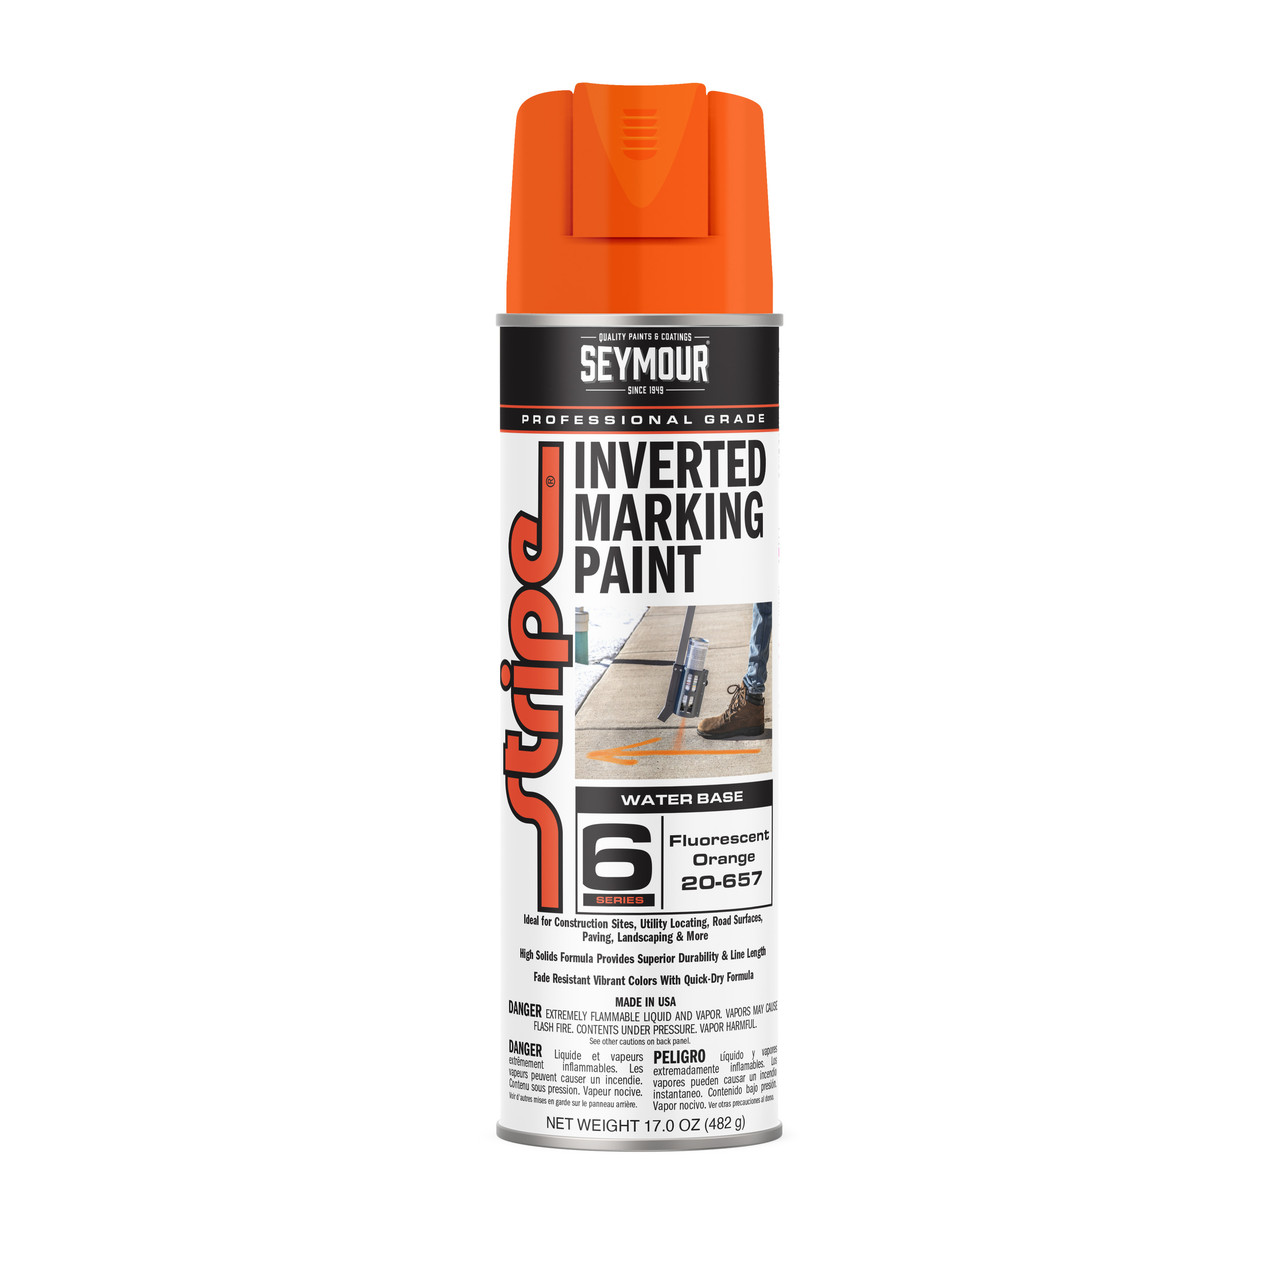 Seymour Inverted (WATER BASED) 20-657 Fluorescent Orange, 17 oz., Marking Paint - 12 CANS